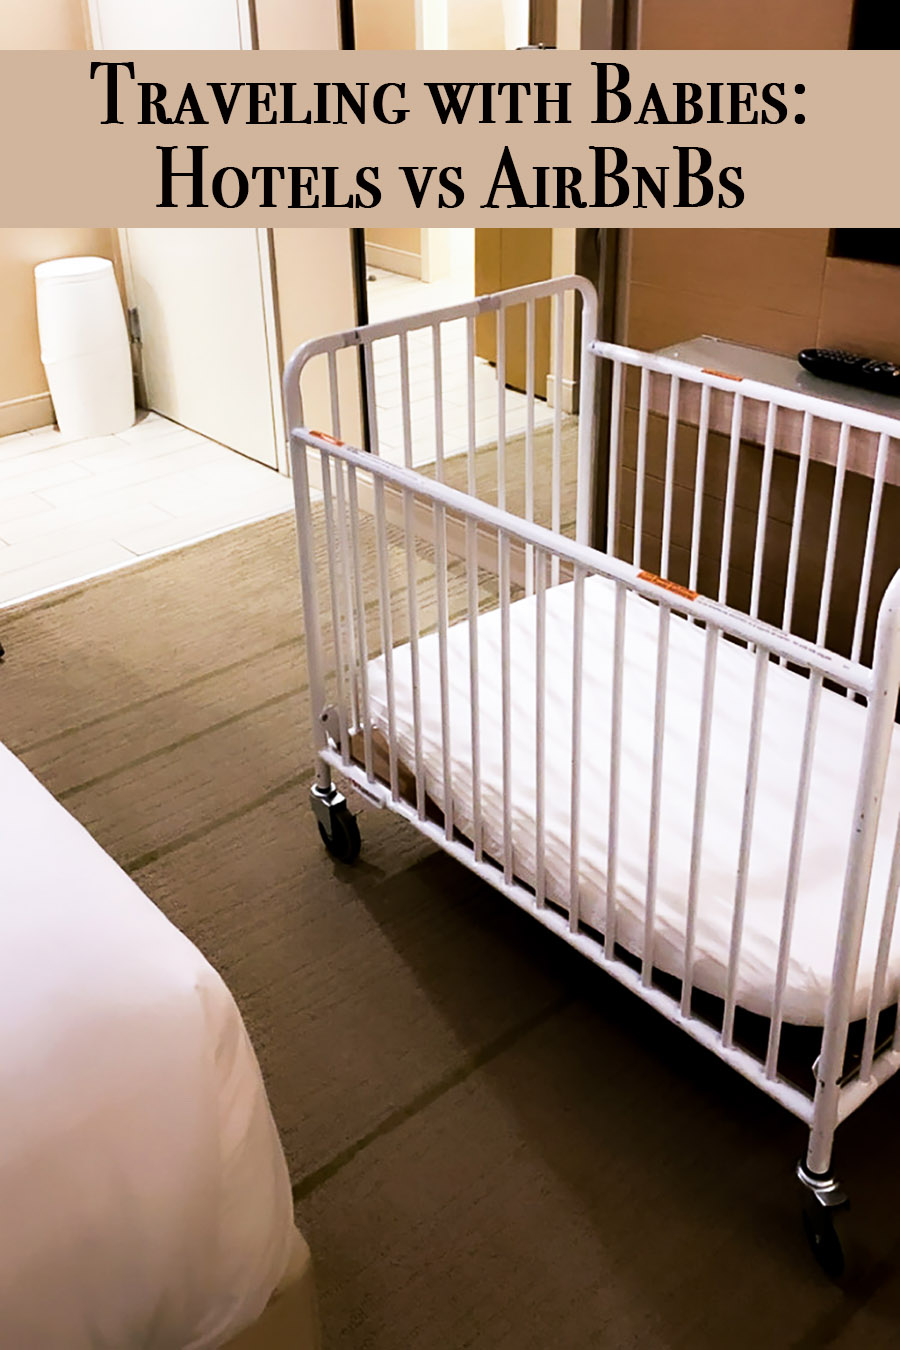 Traveling with Babies requires patience and planning. Read about staying with babies in hotels and staying in AirBnBs for easier travel with newborns and infants.